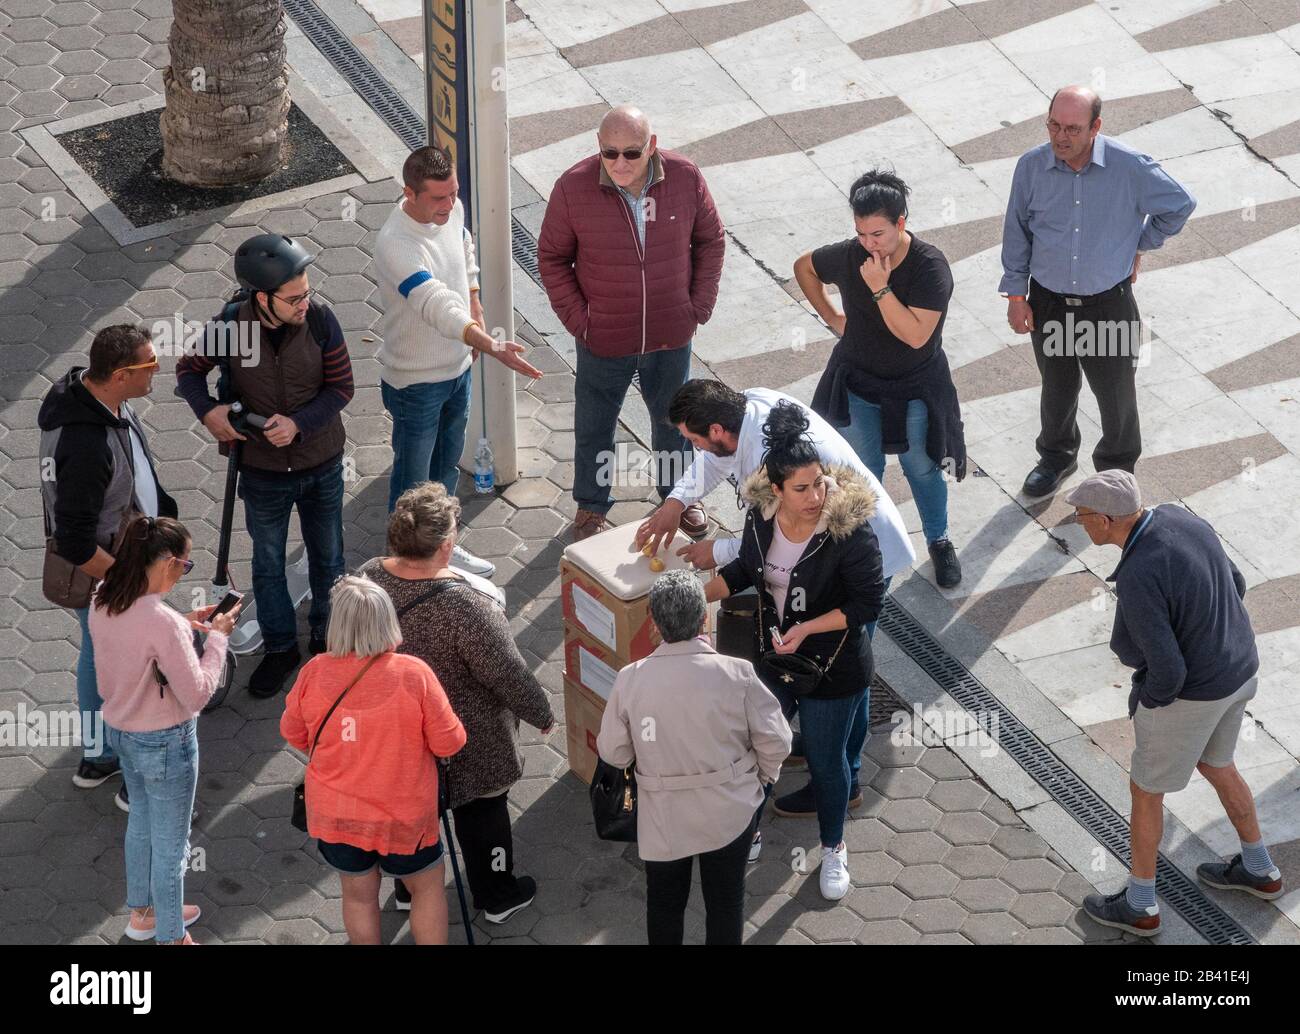 Three shell game, con artists on the city streets, all the people appear to be part of the scam aimed at gullible tourists. Stock Photo